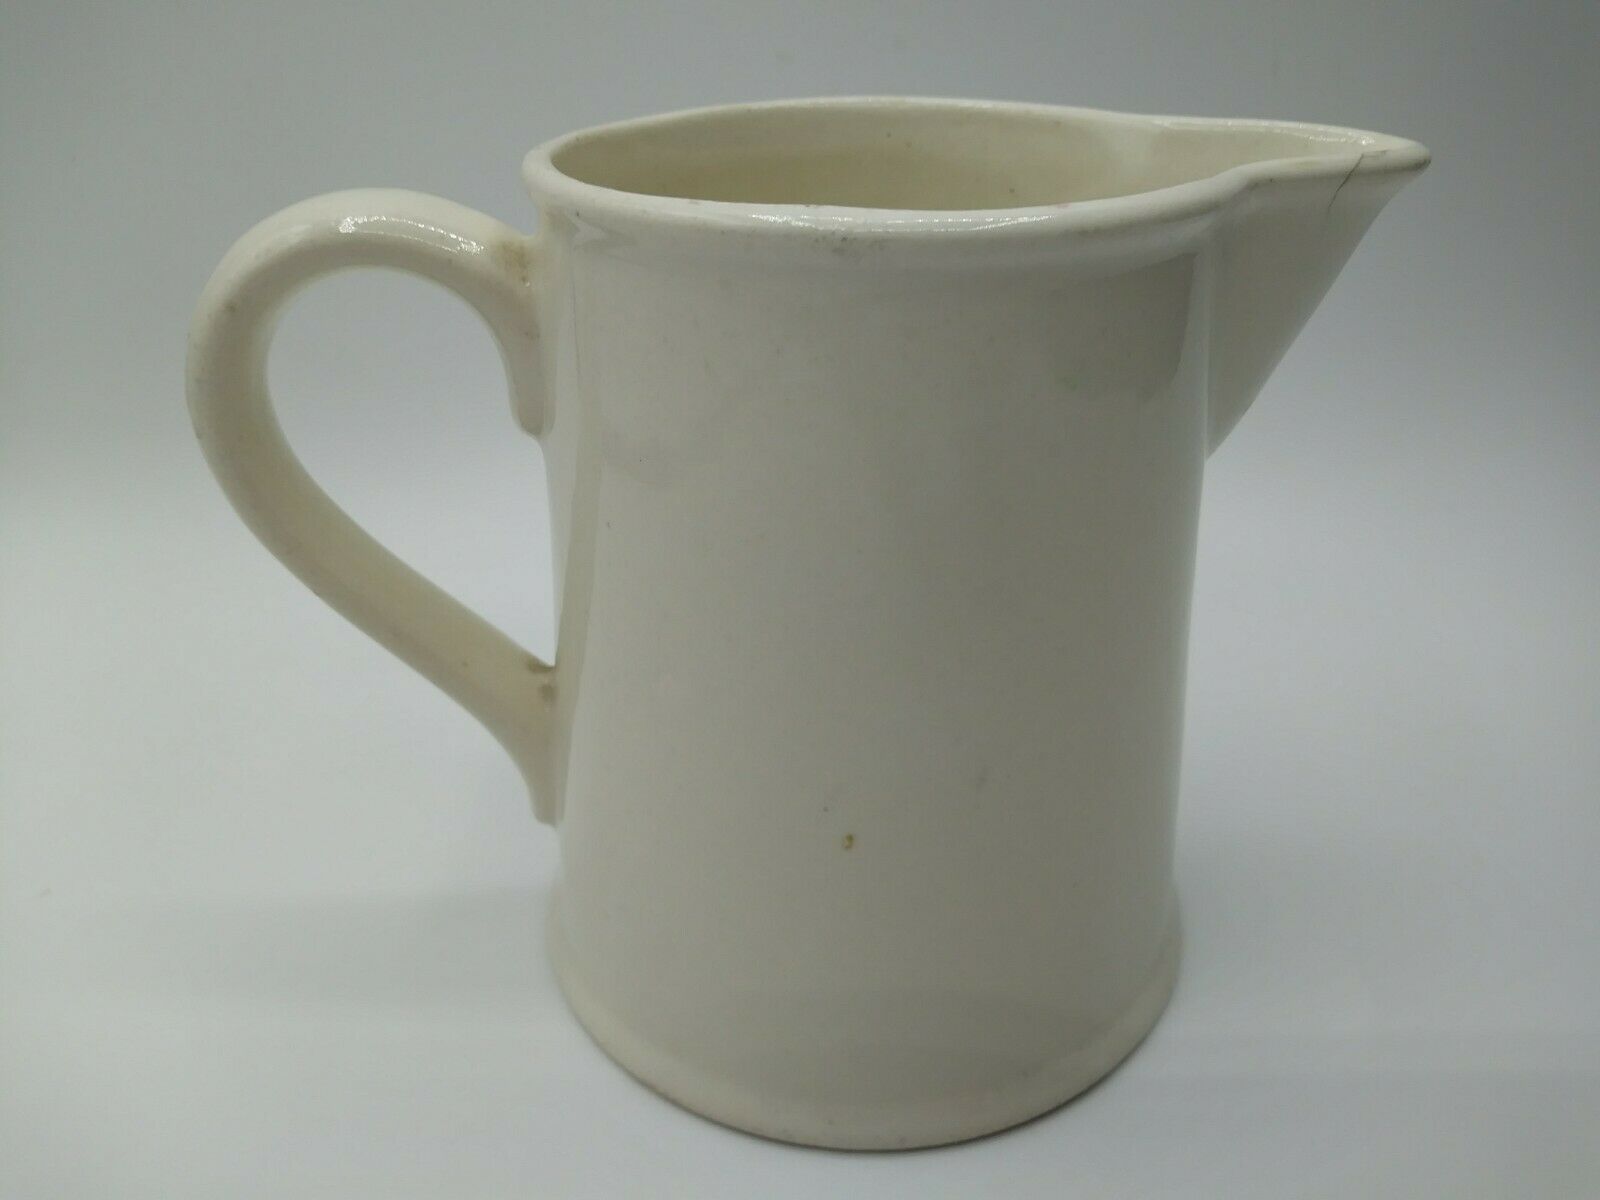 Antique White Porcelain Milk Pitcher Of Unknown Origin In Family Since 1920